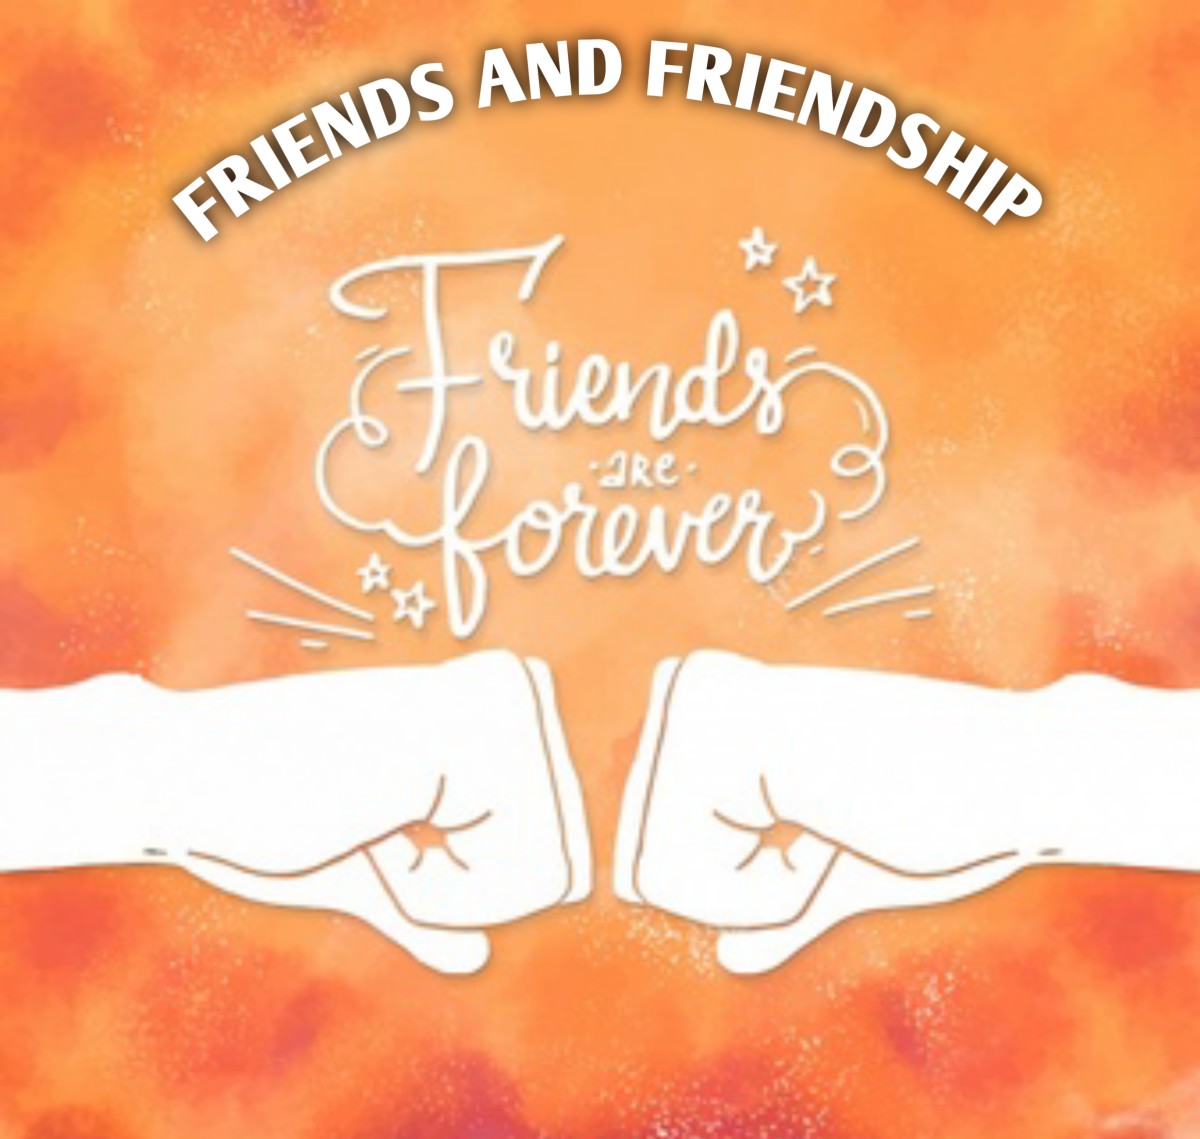 Friends And Friendship